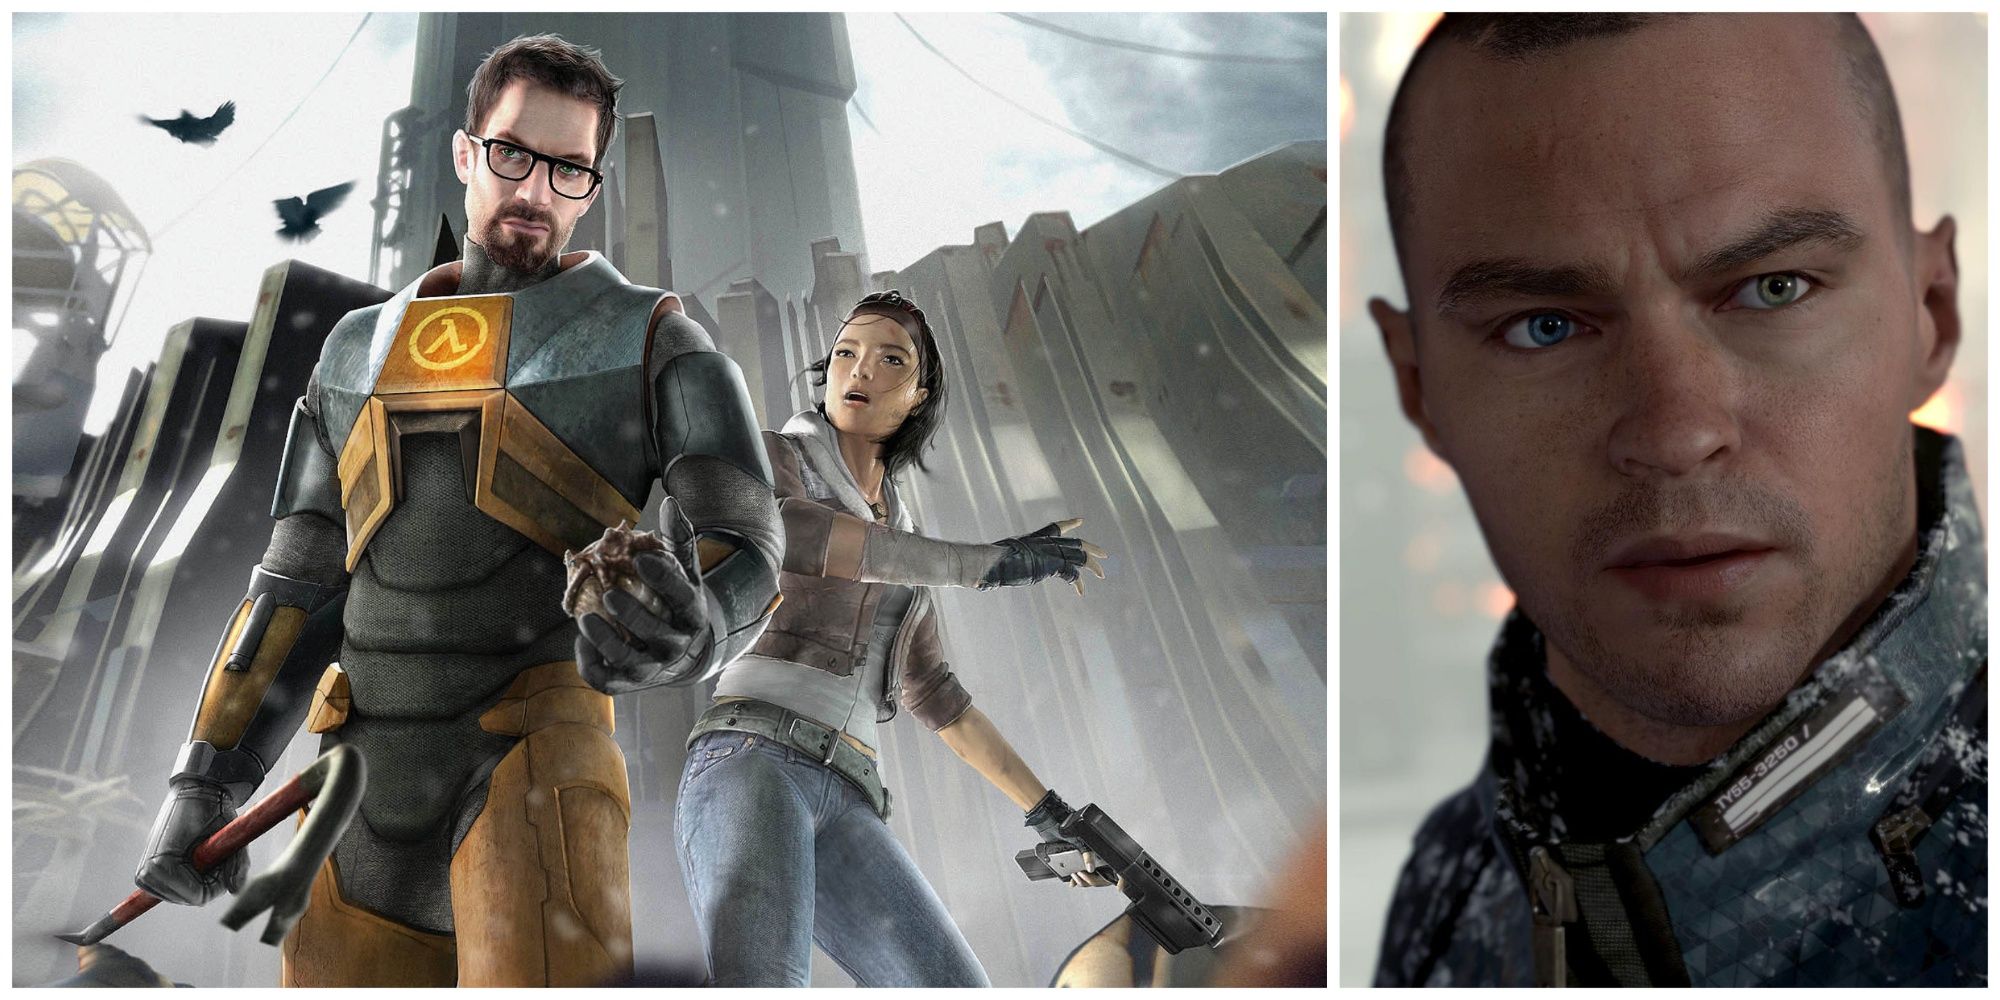 Collage featuring Gordon Freeman from Half-Life 2 (left) and Markus from Detroit: Become Human (right)